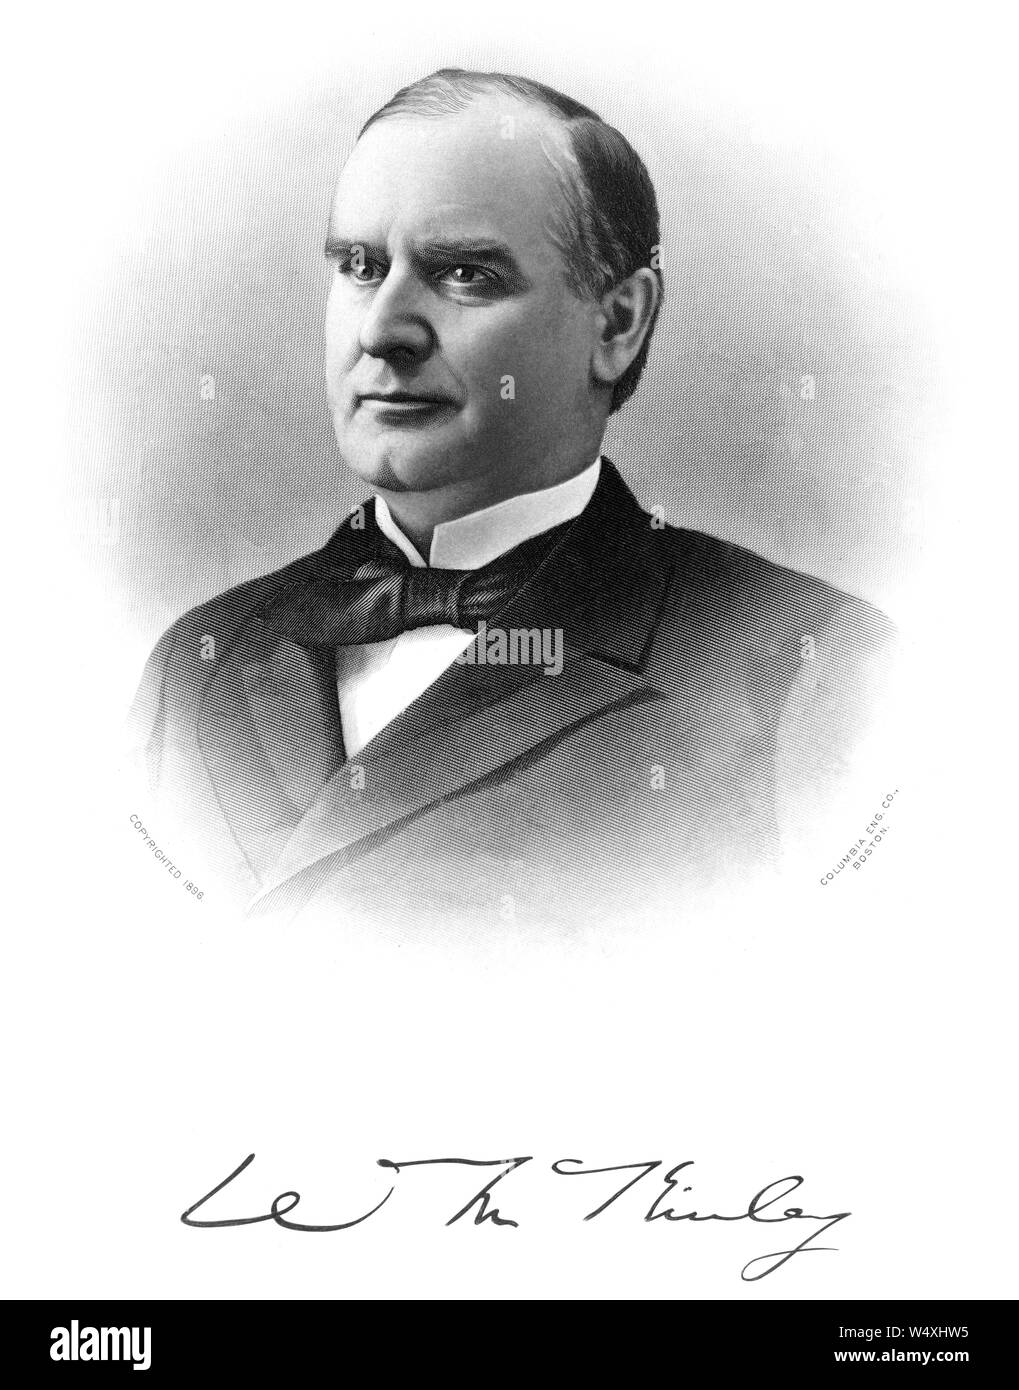 William McKinley (1843-1901), 25th President of the United States 1897-1901, Head and Shoulders Portrait, Engraving, Columbia Engr. Co., 1896 Stock Photo